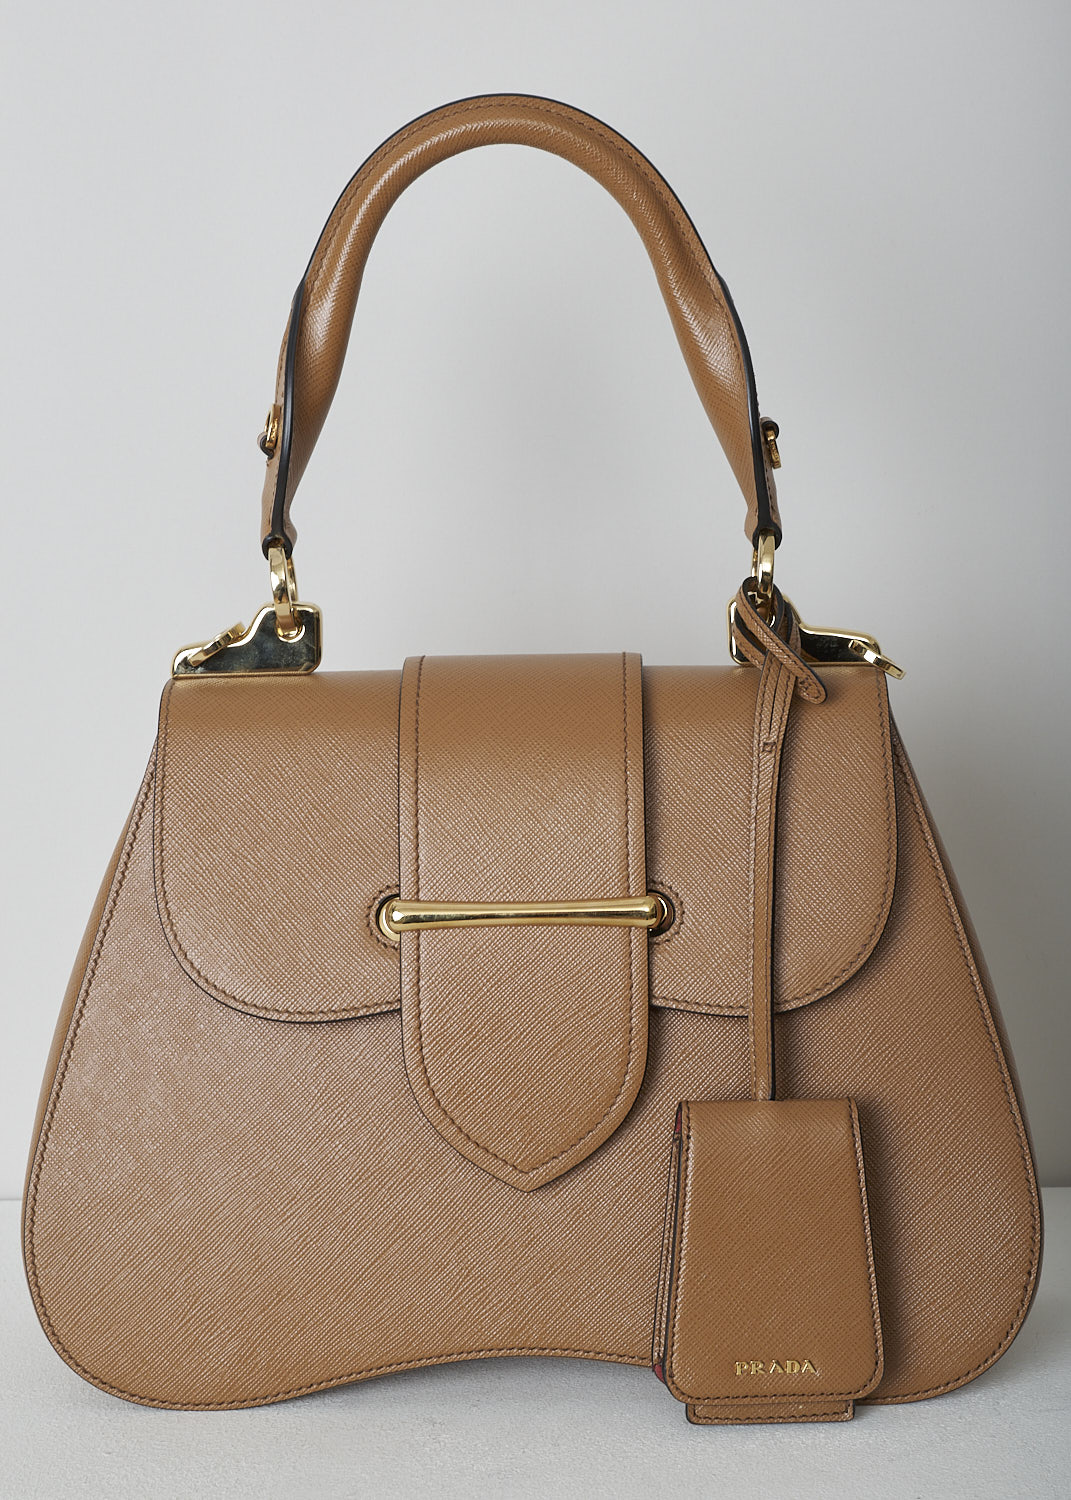 PRADA, MEDIUM SIDONIE TOP HANDLE BAG IN CARAMEL BROWN, CARTELLA_1BN005_F098L_CARAMEL, Brown, Detail, This mid-sized caramel brown Sidonie Top Handle Bag is made with Saffiano leather. The bag comes with a leather handle and an adjustable and detachable shoulder strap. The bag has gold-tone metal hardware with the brand's logo on the back. The removable leather keychain has that same gold-tone logo on it. The slip-through closure opens up to reveal its red interior. The bag has a single, spacious compartment with a zipped inner pocket to one side and a patch pocket on the other side.  

